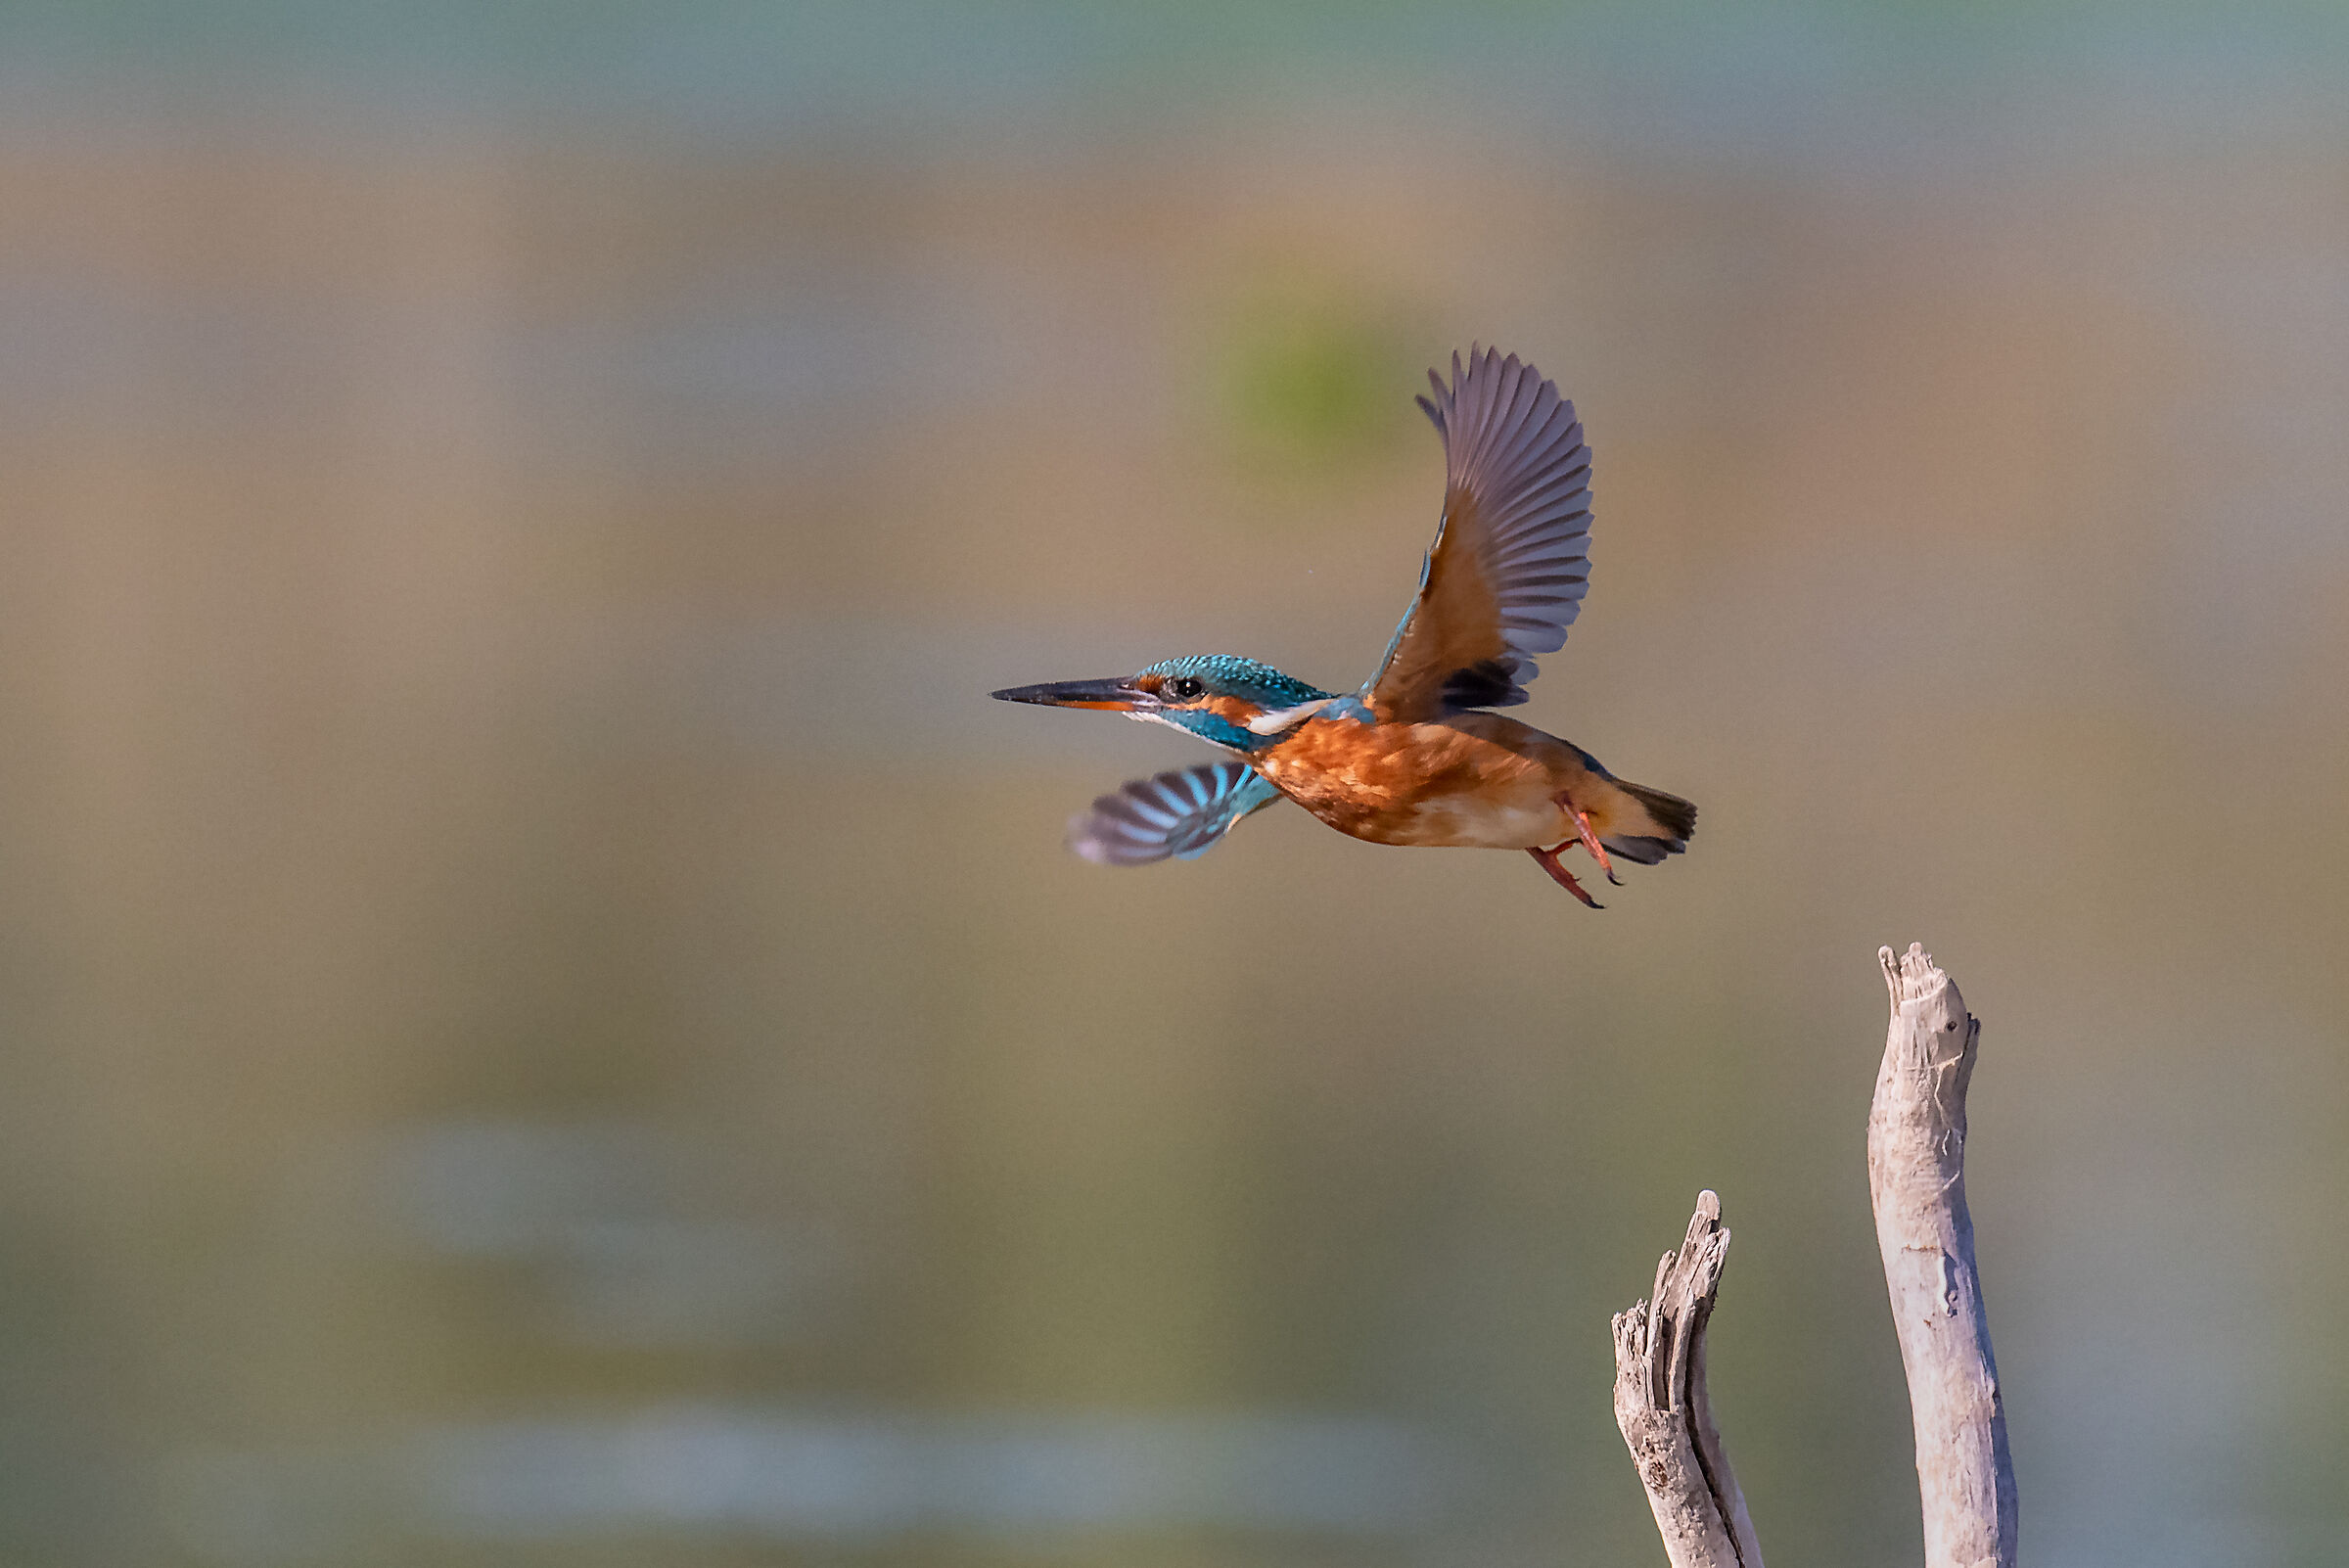 Kingfisher on the way out of the perche...